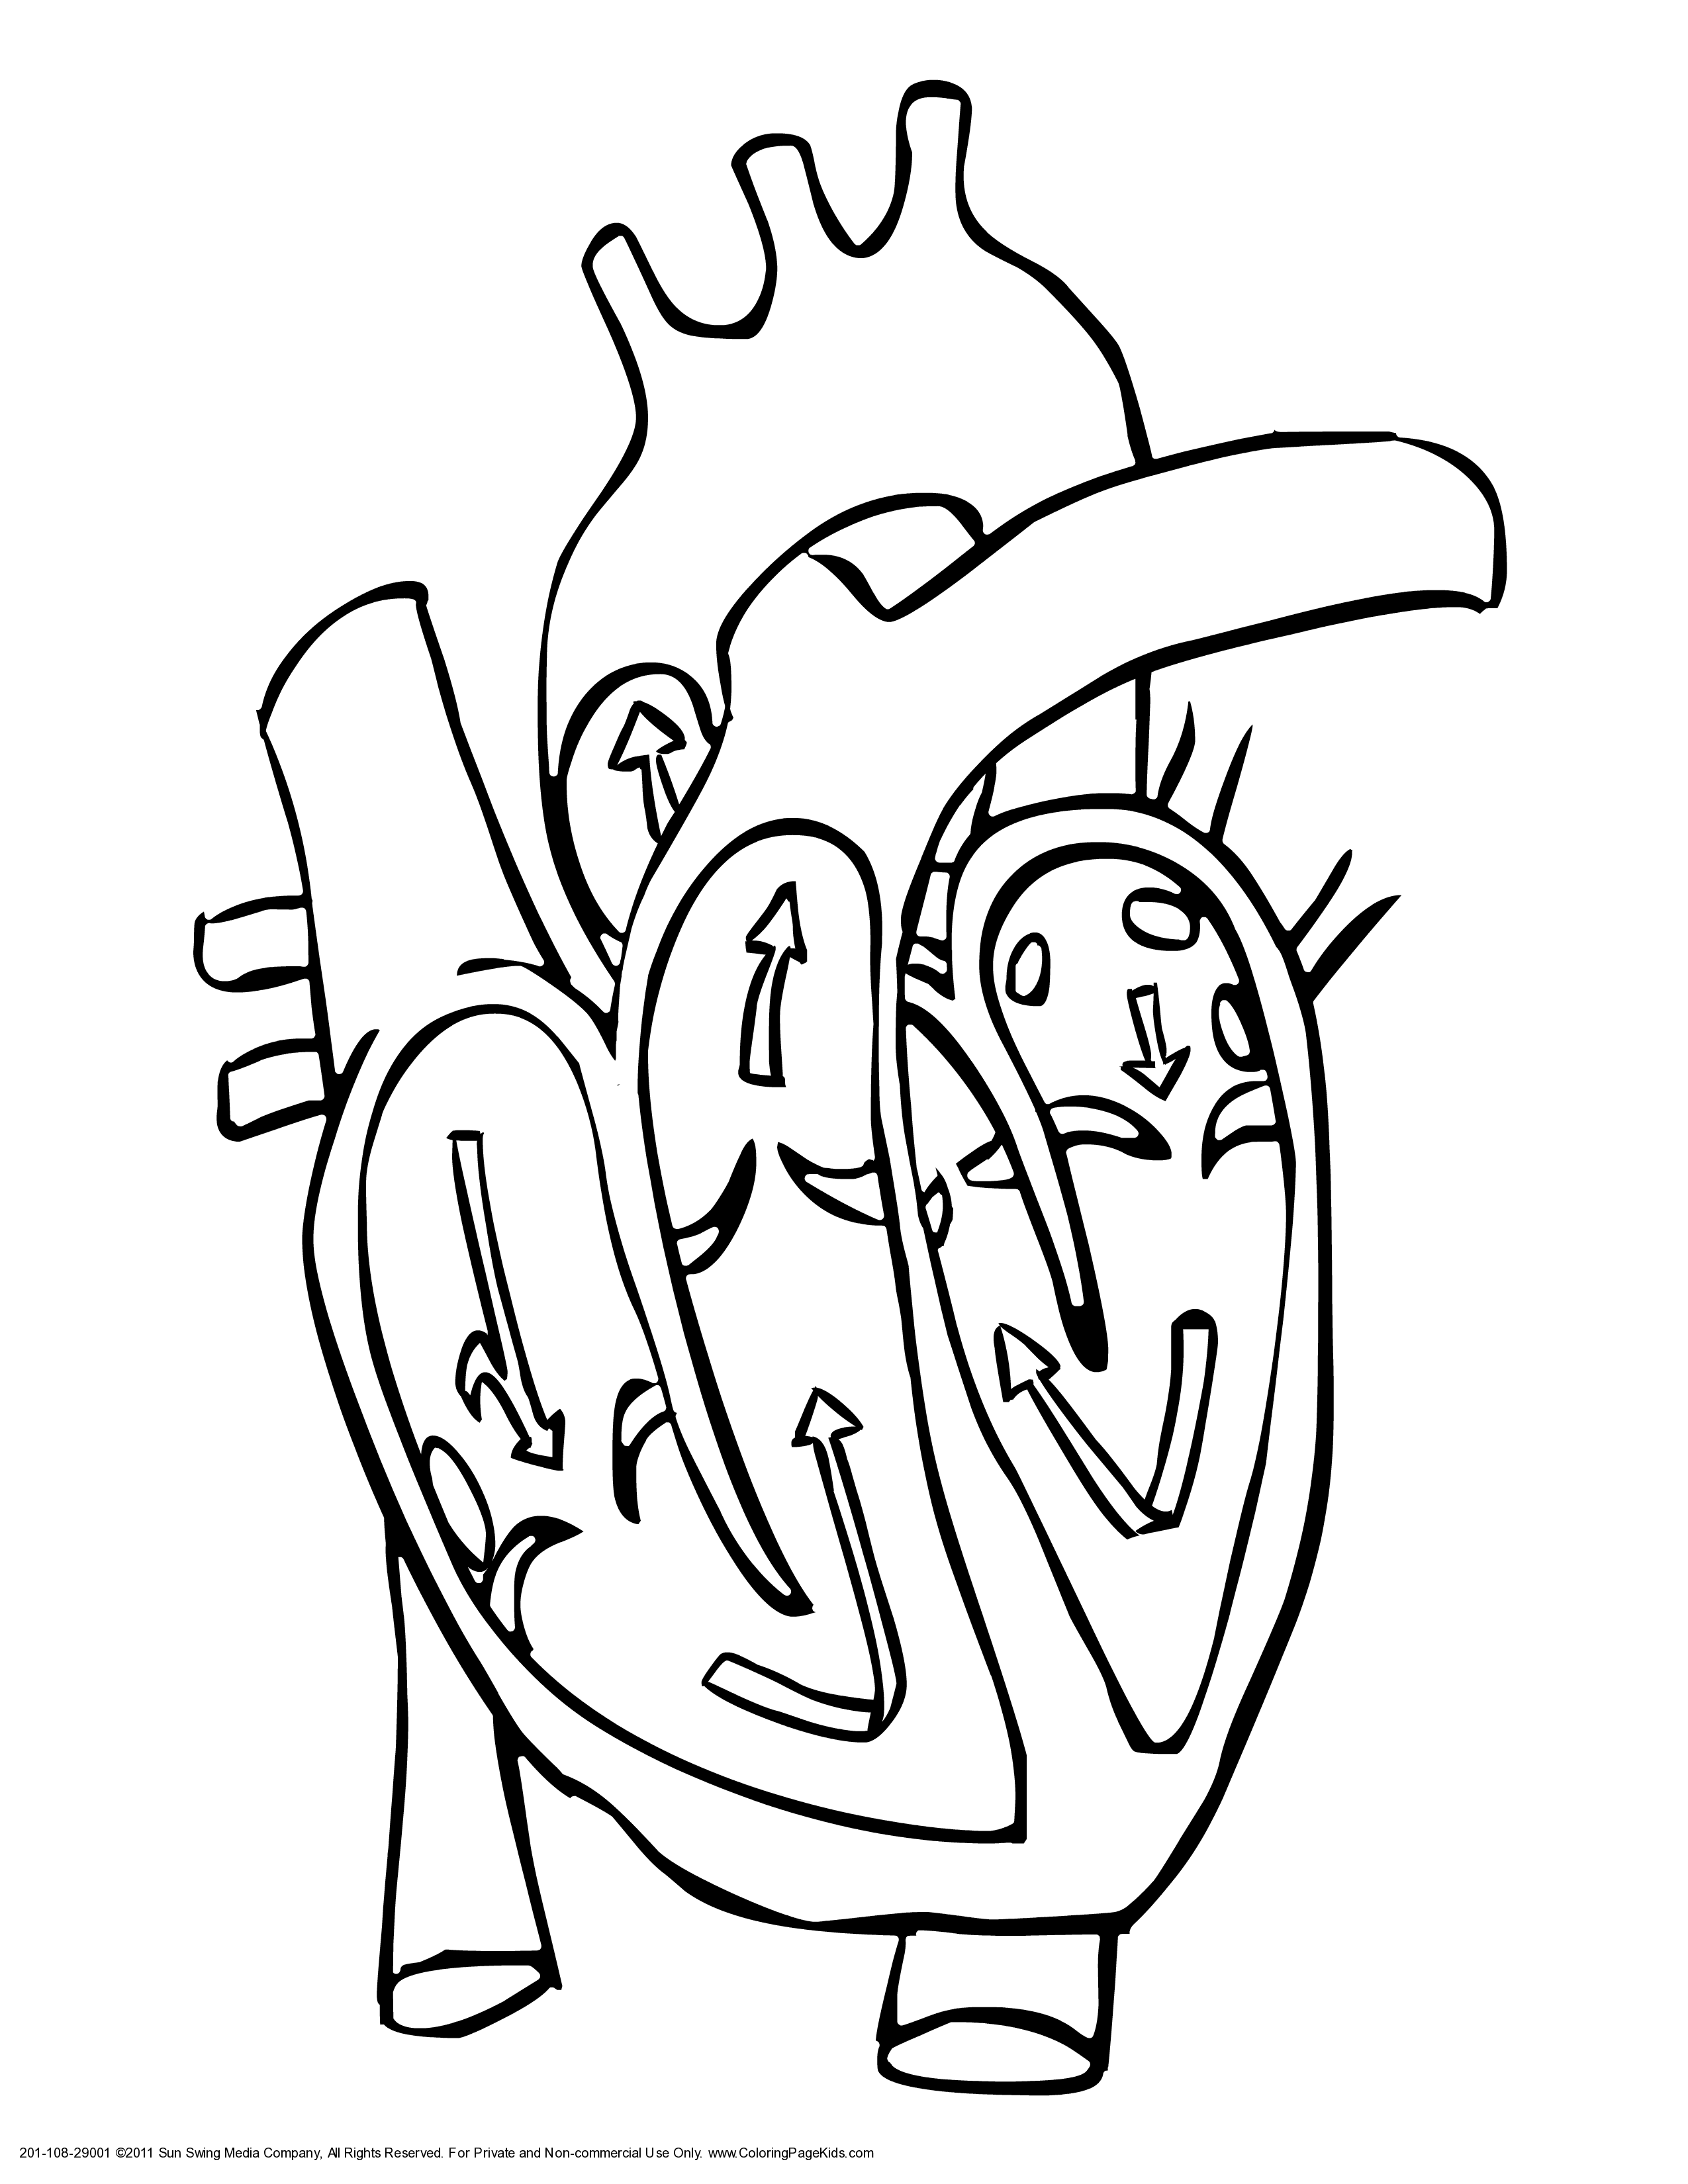 Images For > Simple Heart Diagram